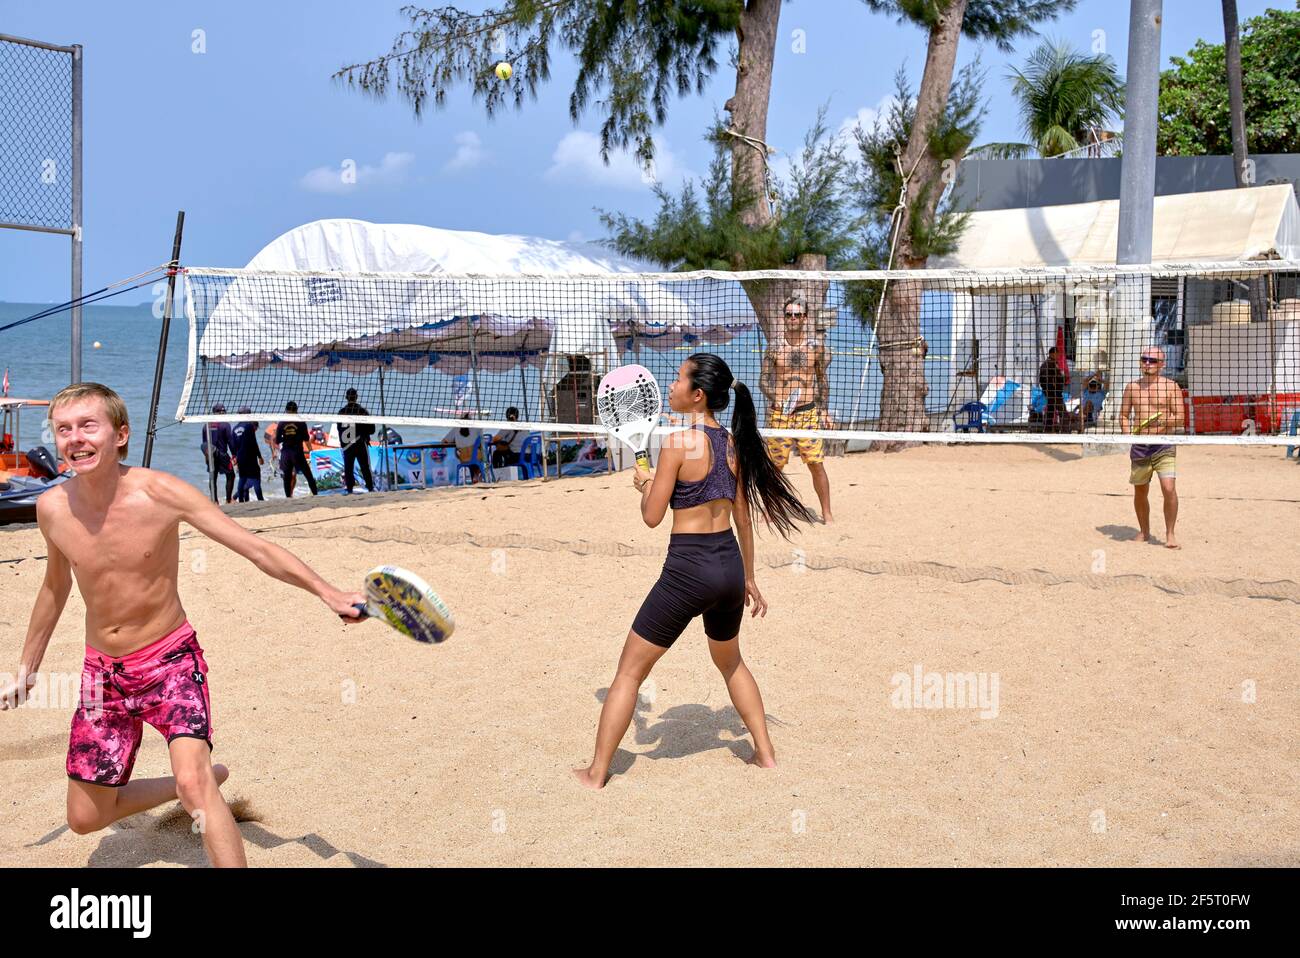 Beach tennis and players facial expression following a successful back hand return of the ball. Stock Photo